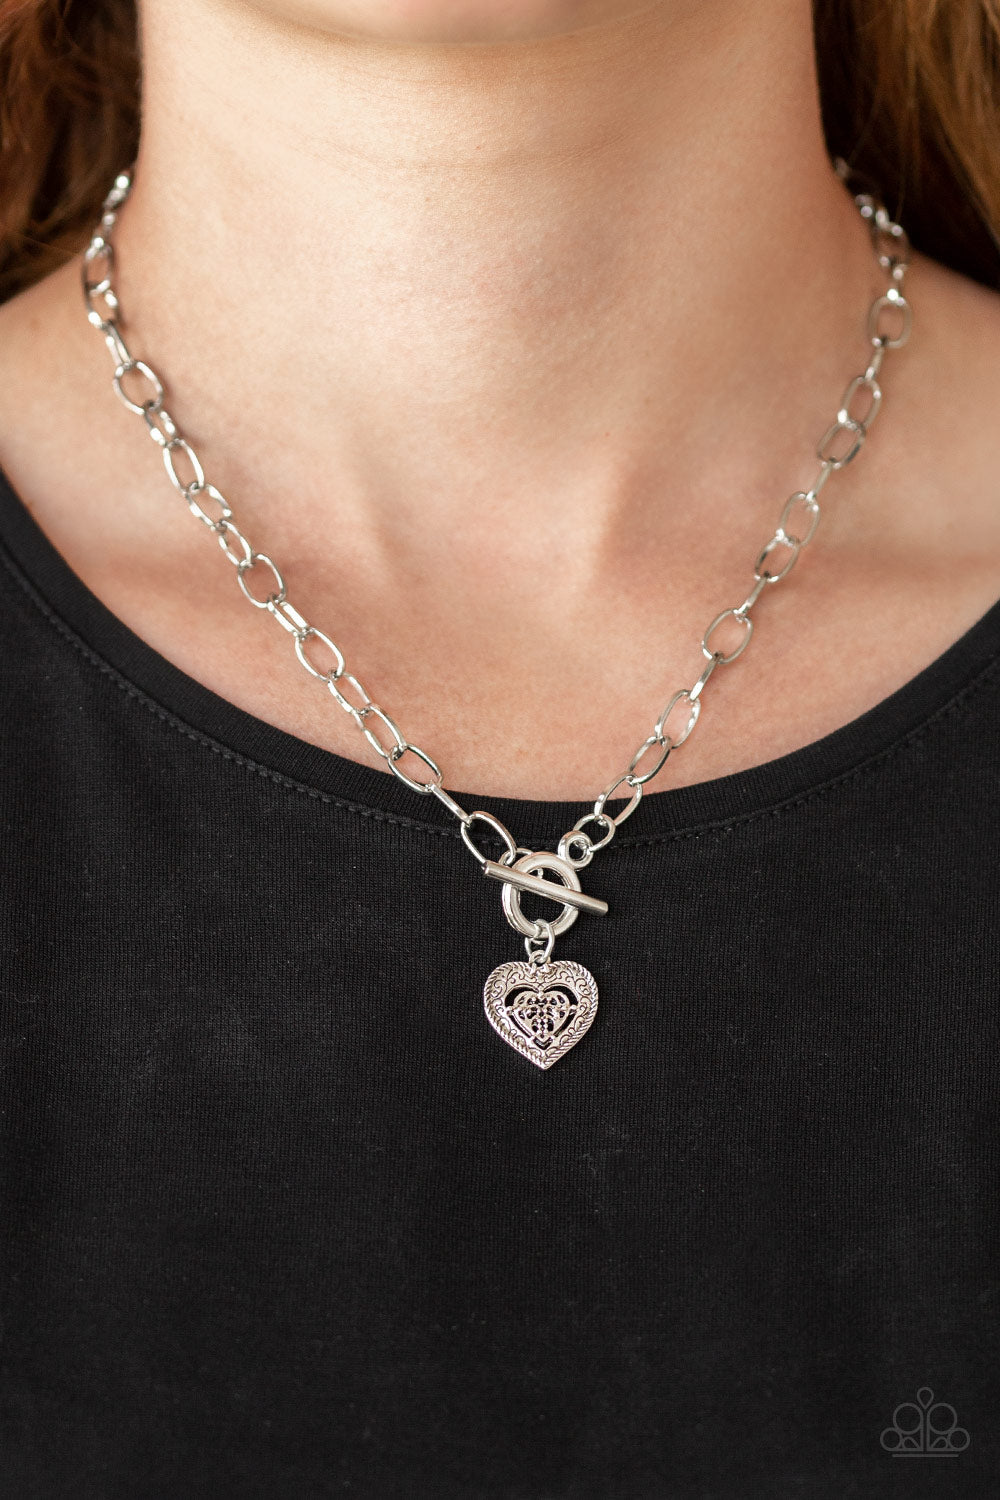 Say No Amour - Silver Necklace 1144N